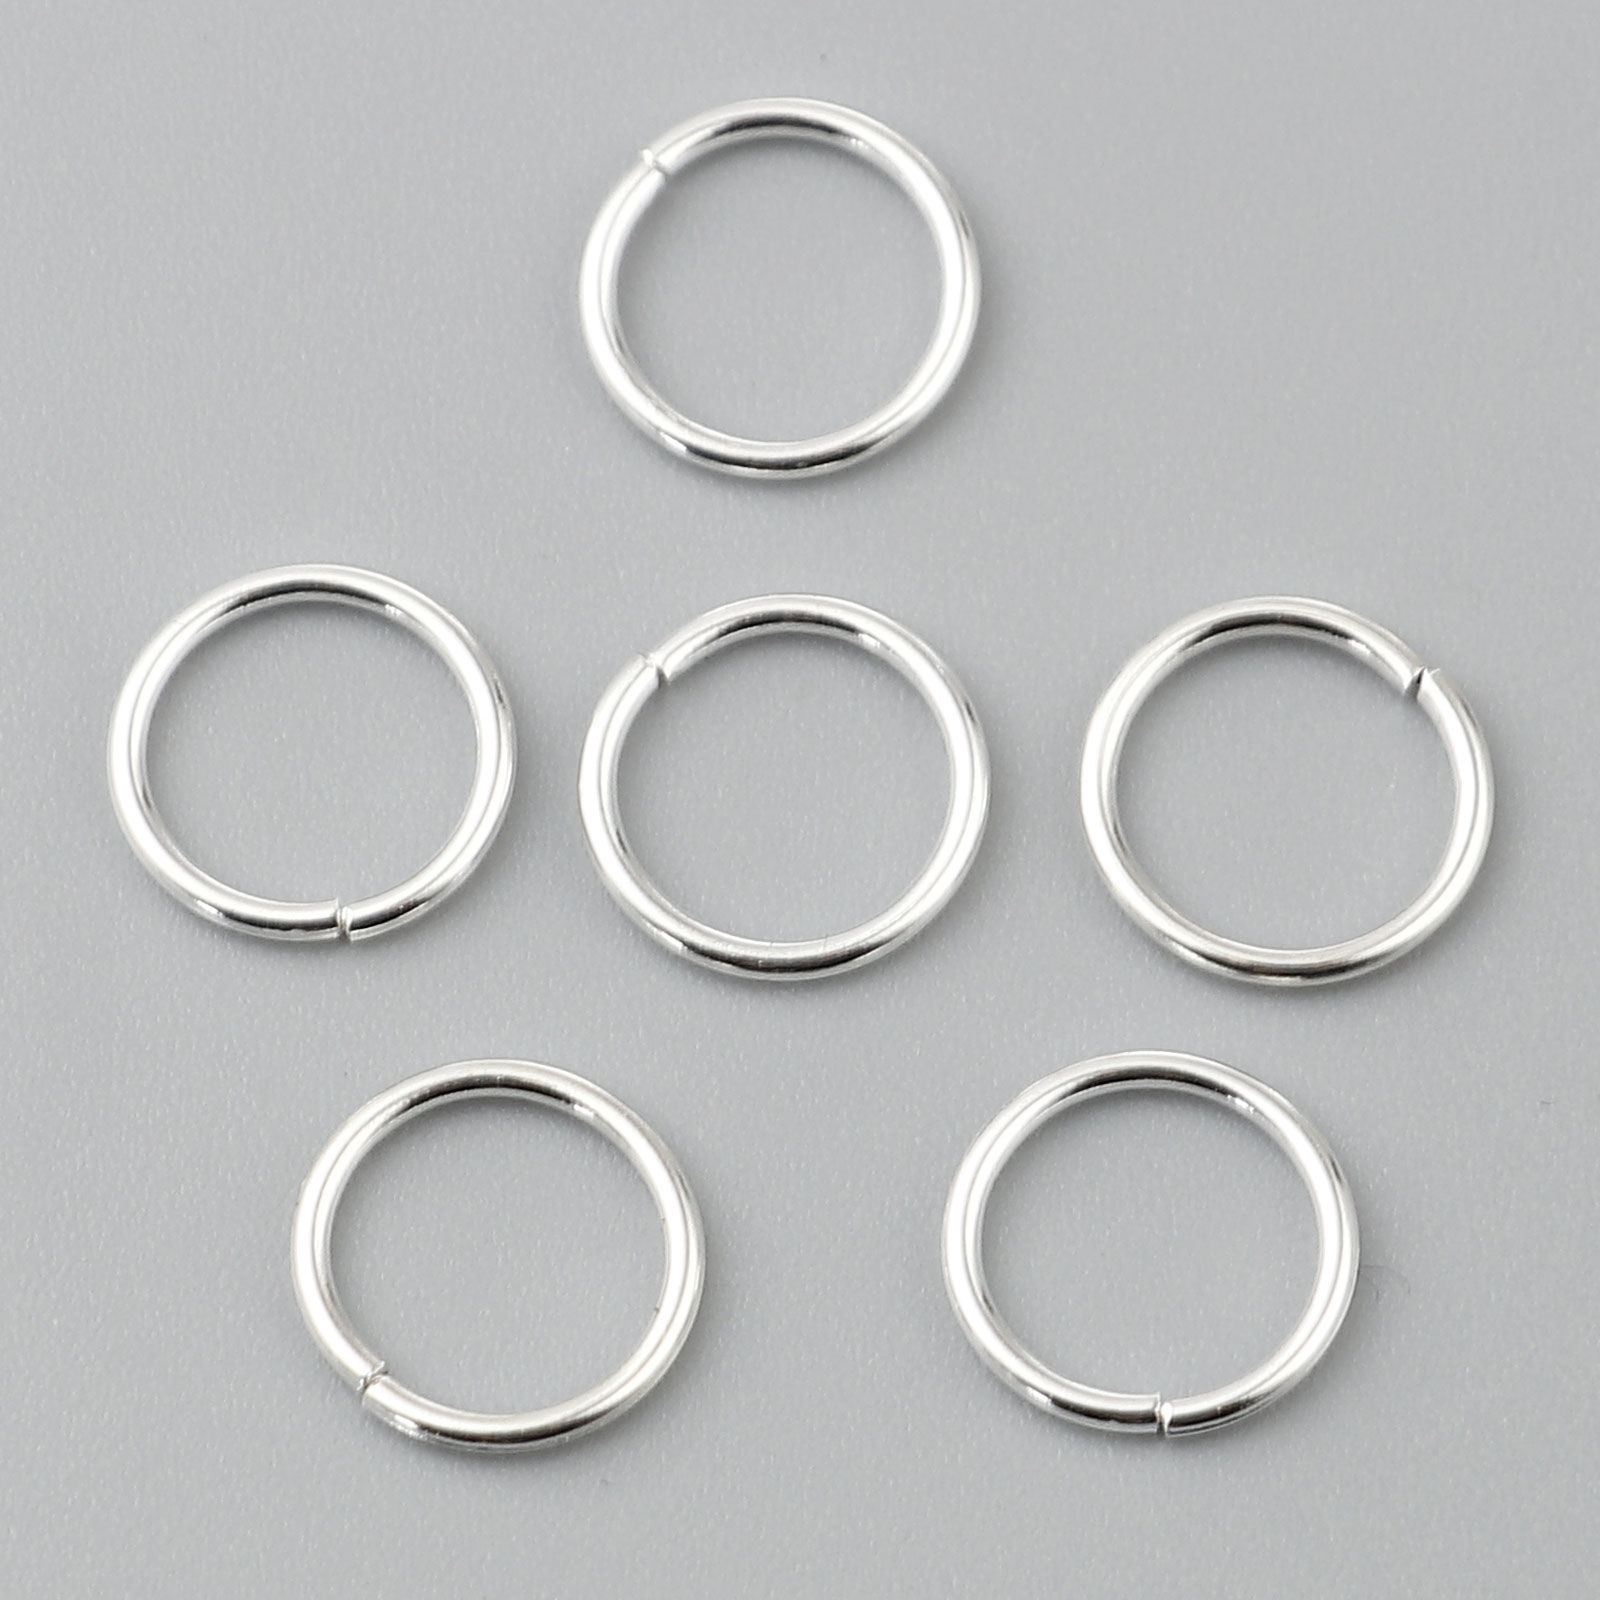 Picture of 1.2mm Iron Based Alloy Open Jump Rings Findings Circle Ring Silver Plated 14mm Dia, 200 PCs